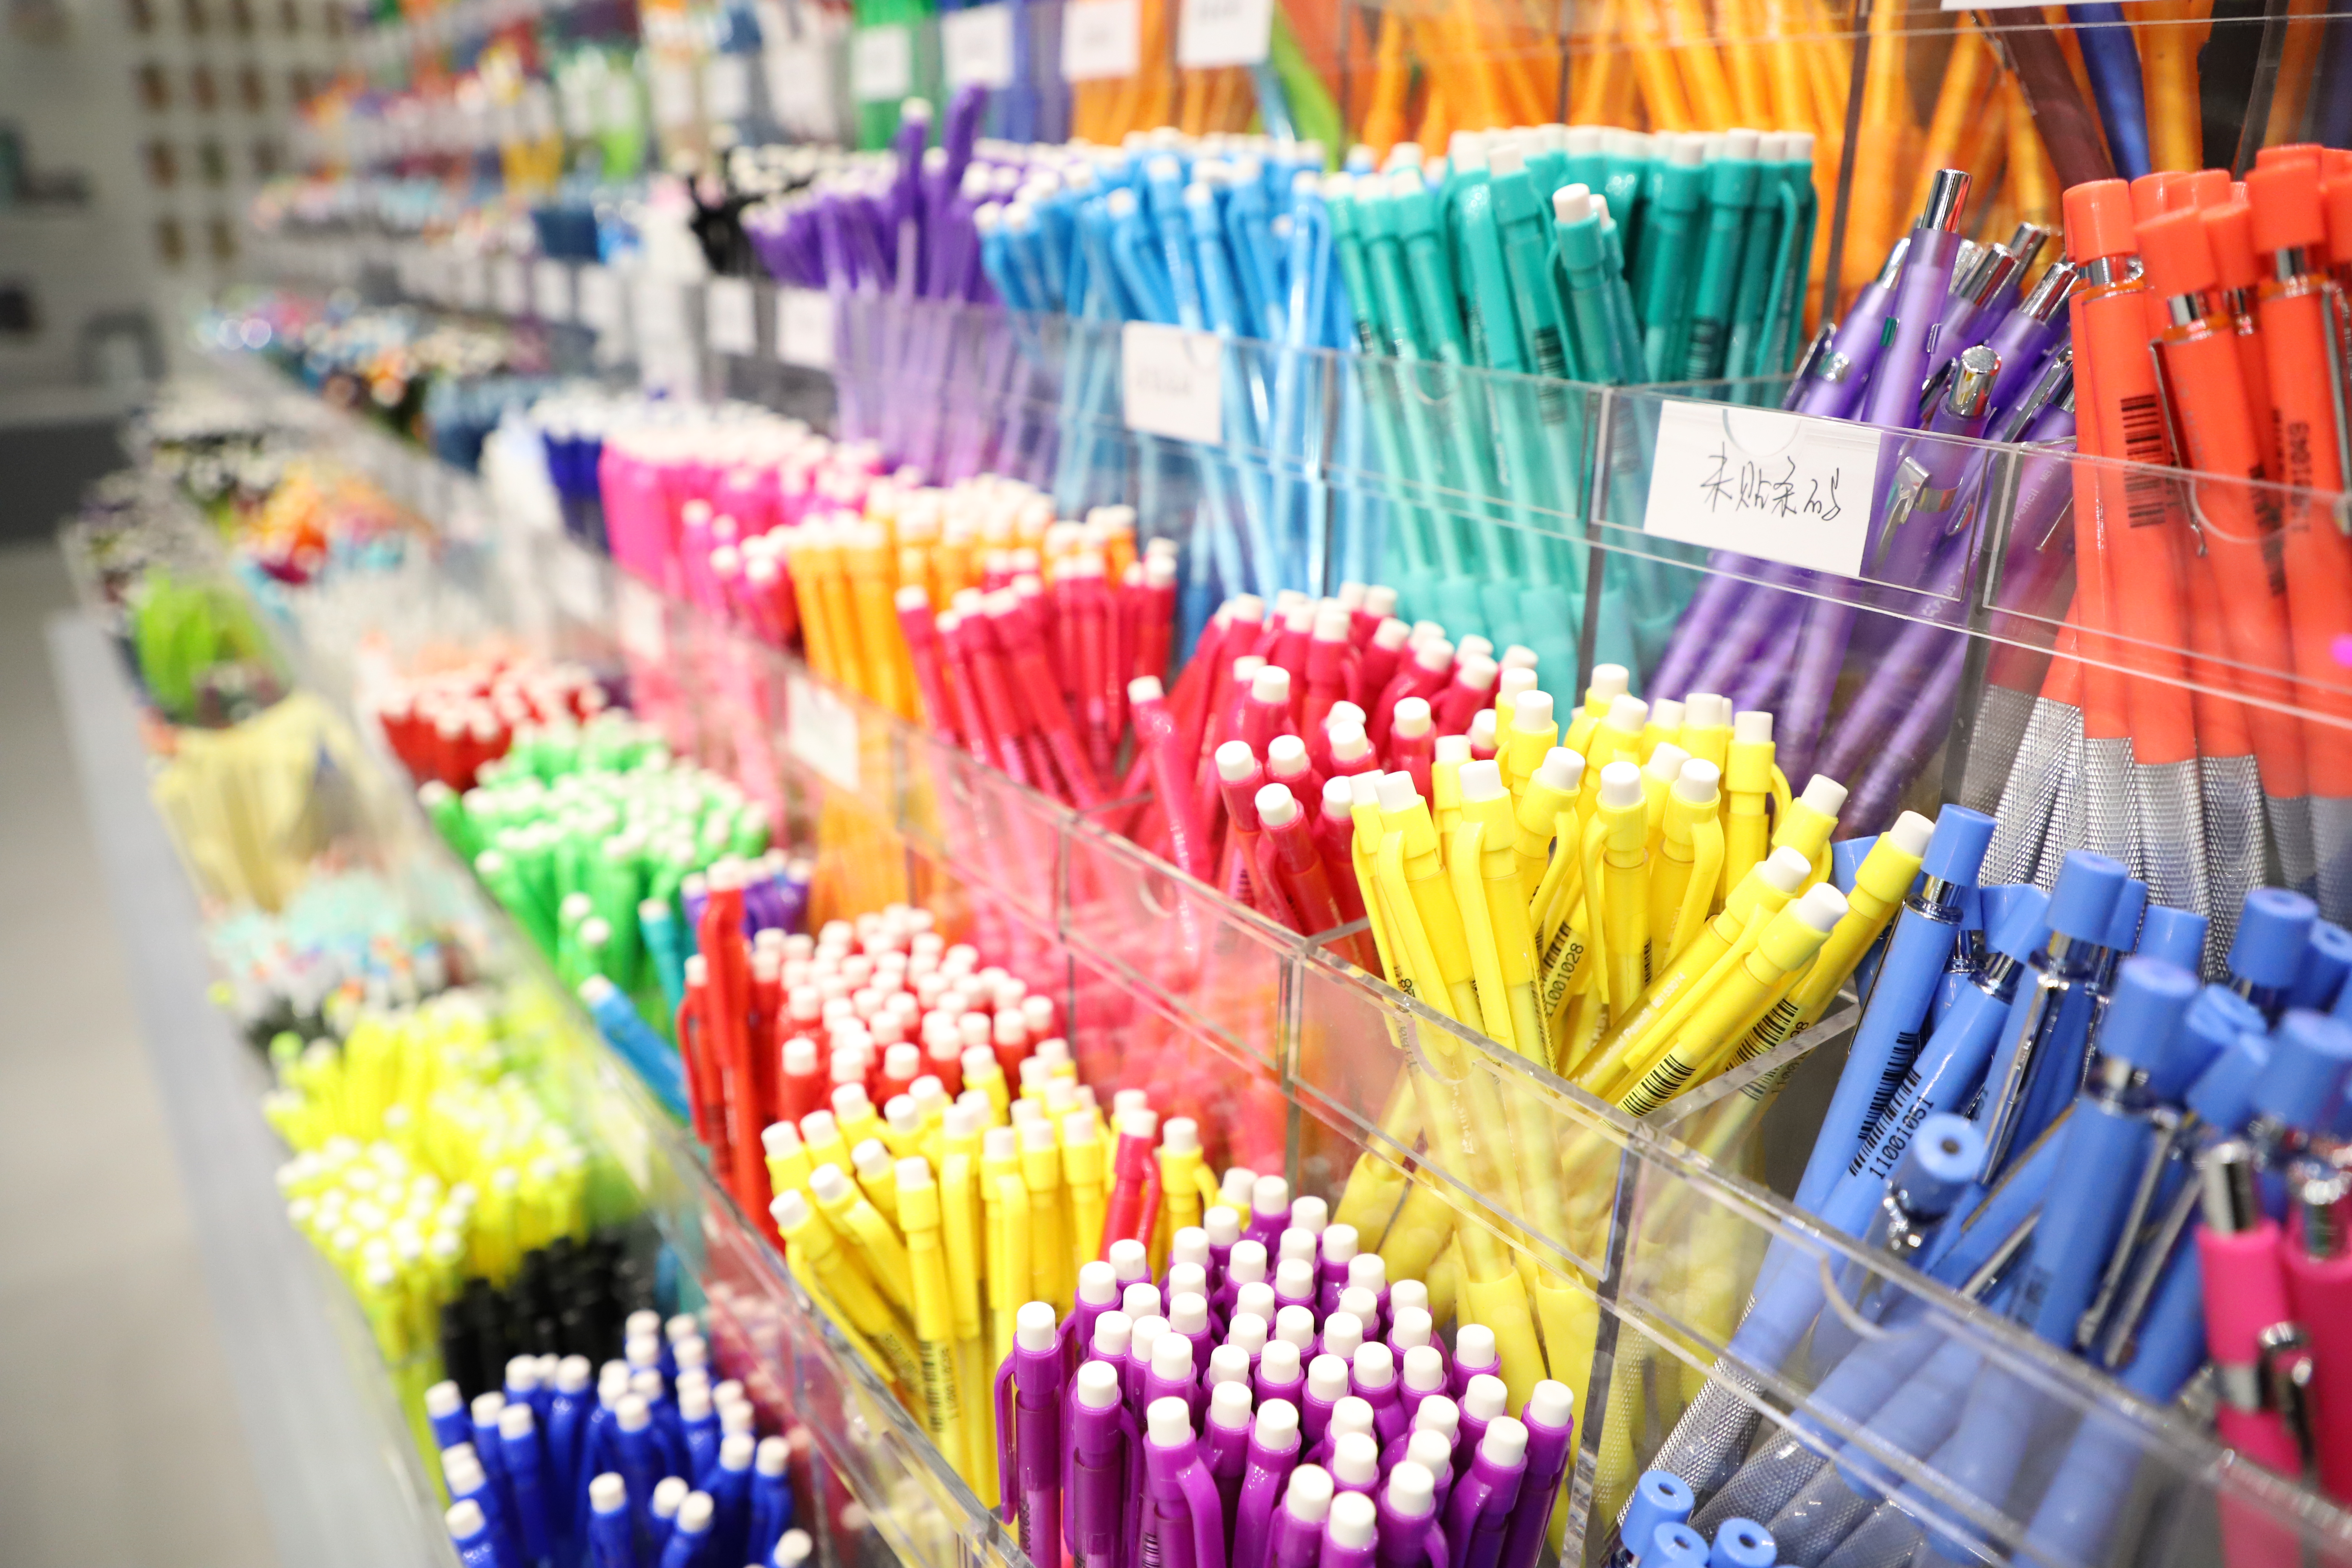 Top 10 stationery companies in China